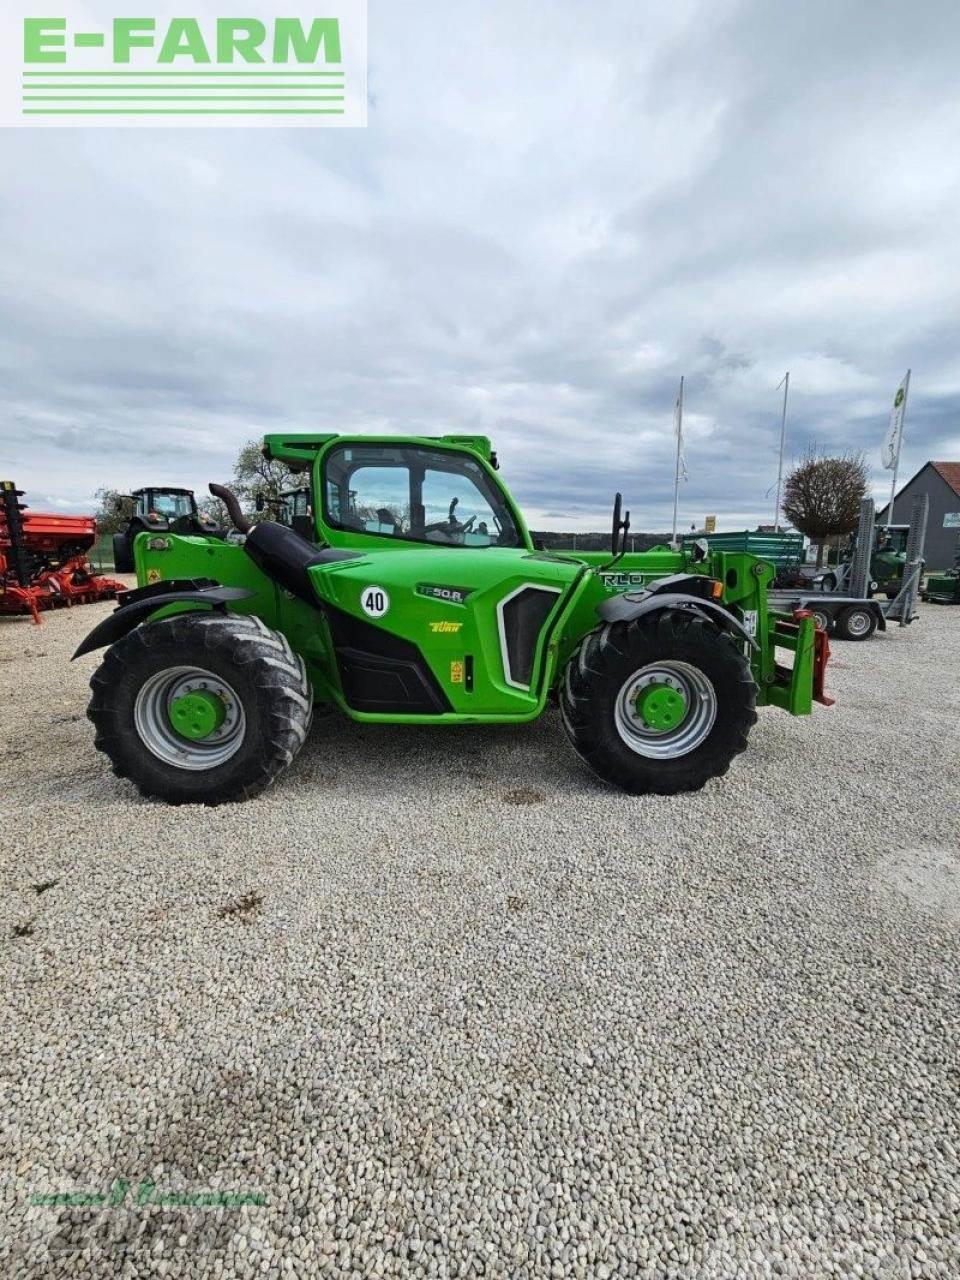 Merlo tf 50.8 tcs-156 cvtronic Telehandlers for agriculture